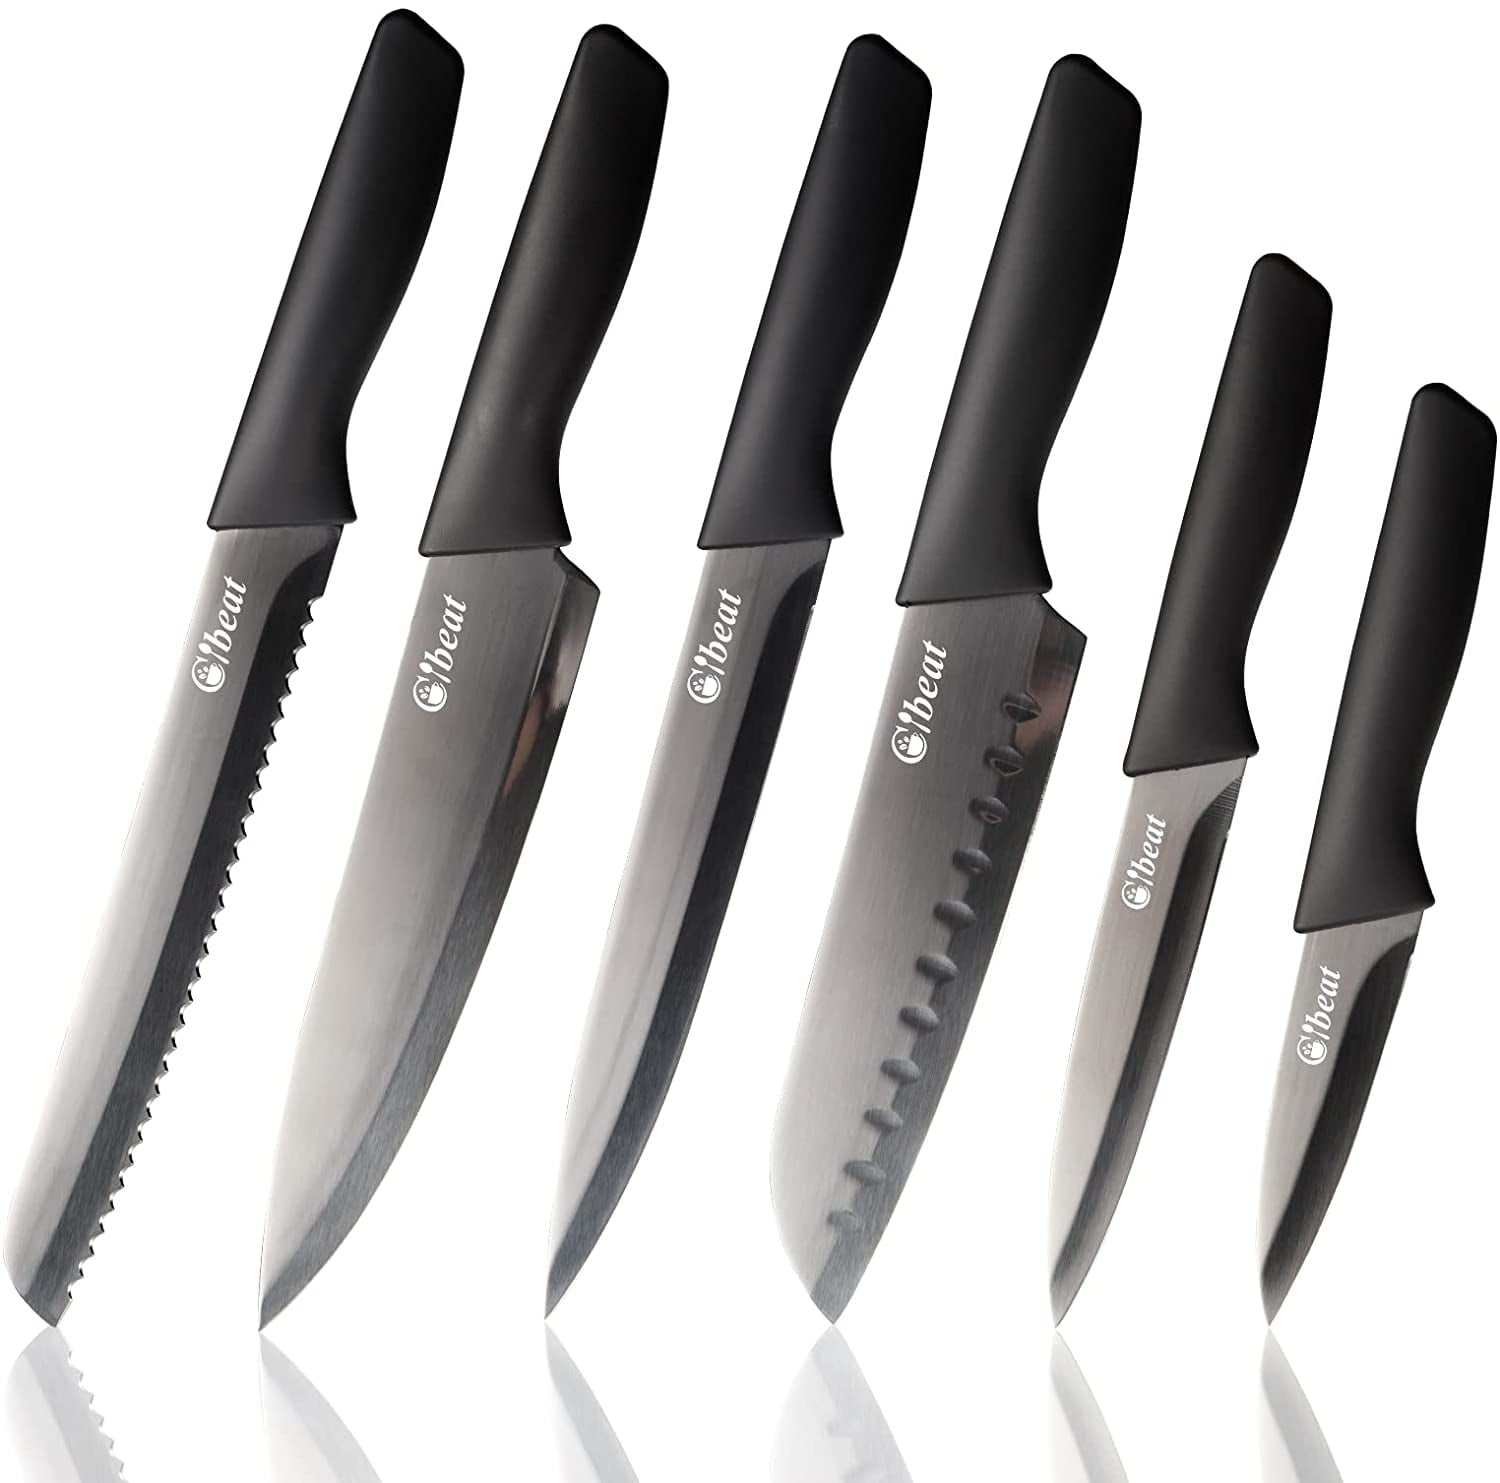 NETTA 6 Piece Stainless Steel Knife Set - Black, with Clear Storage Bl